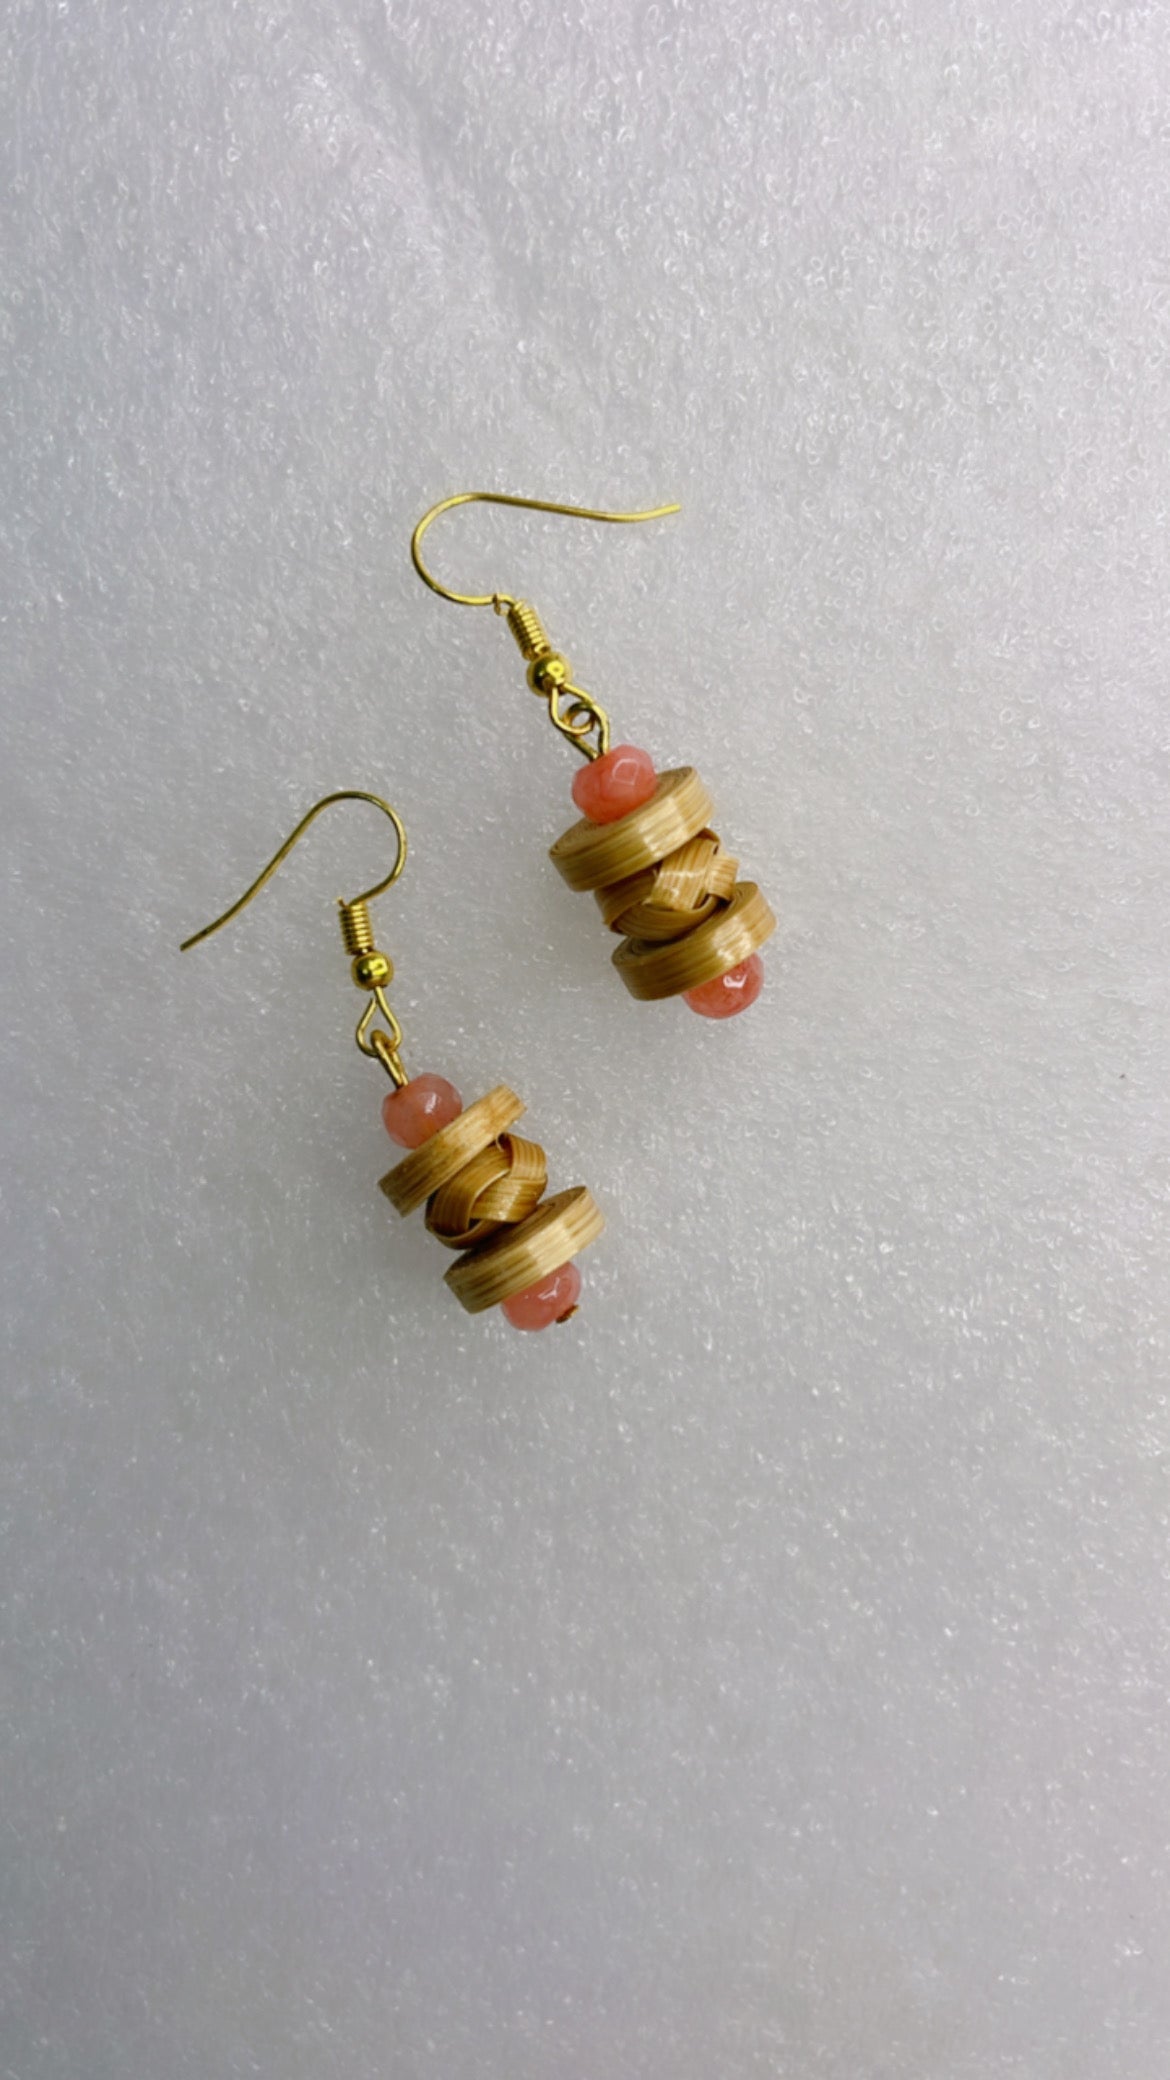 Handcrafted Bamboo Quilled and Weaved Earrings